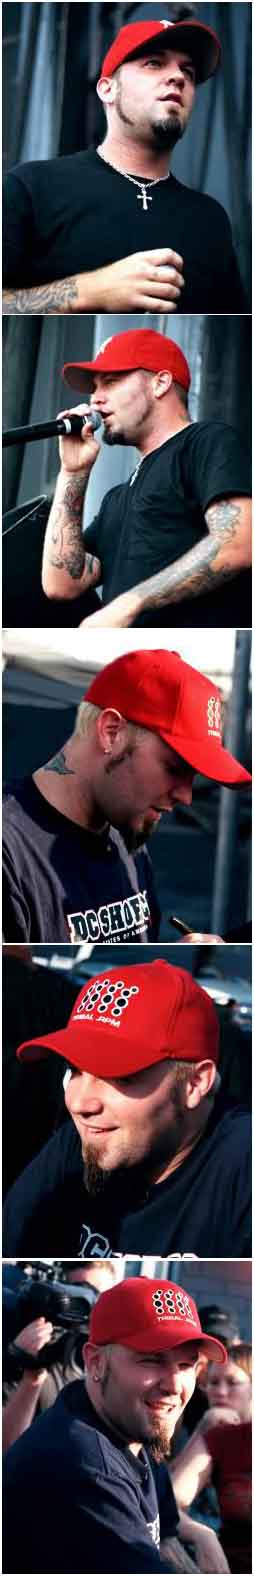 fred durst biography